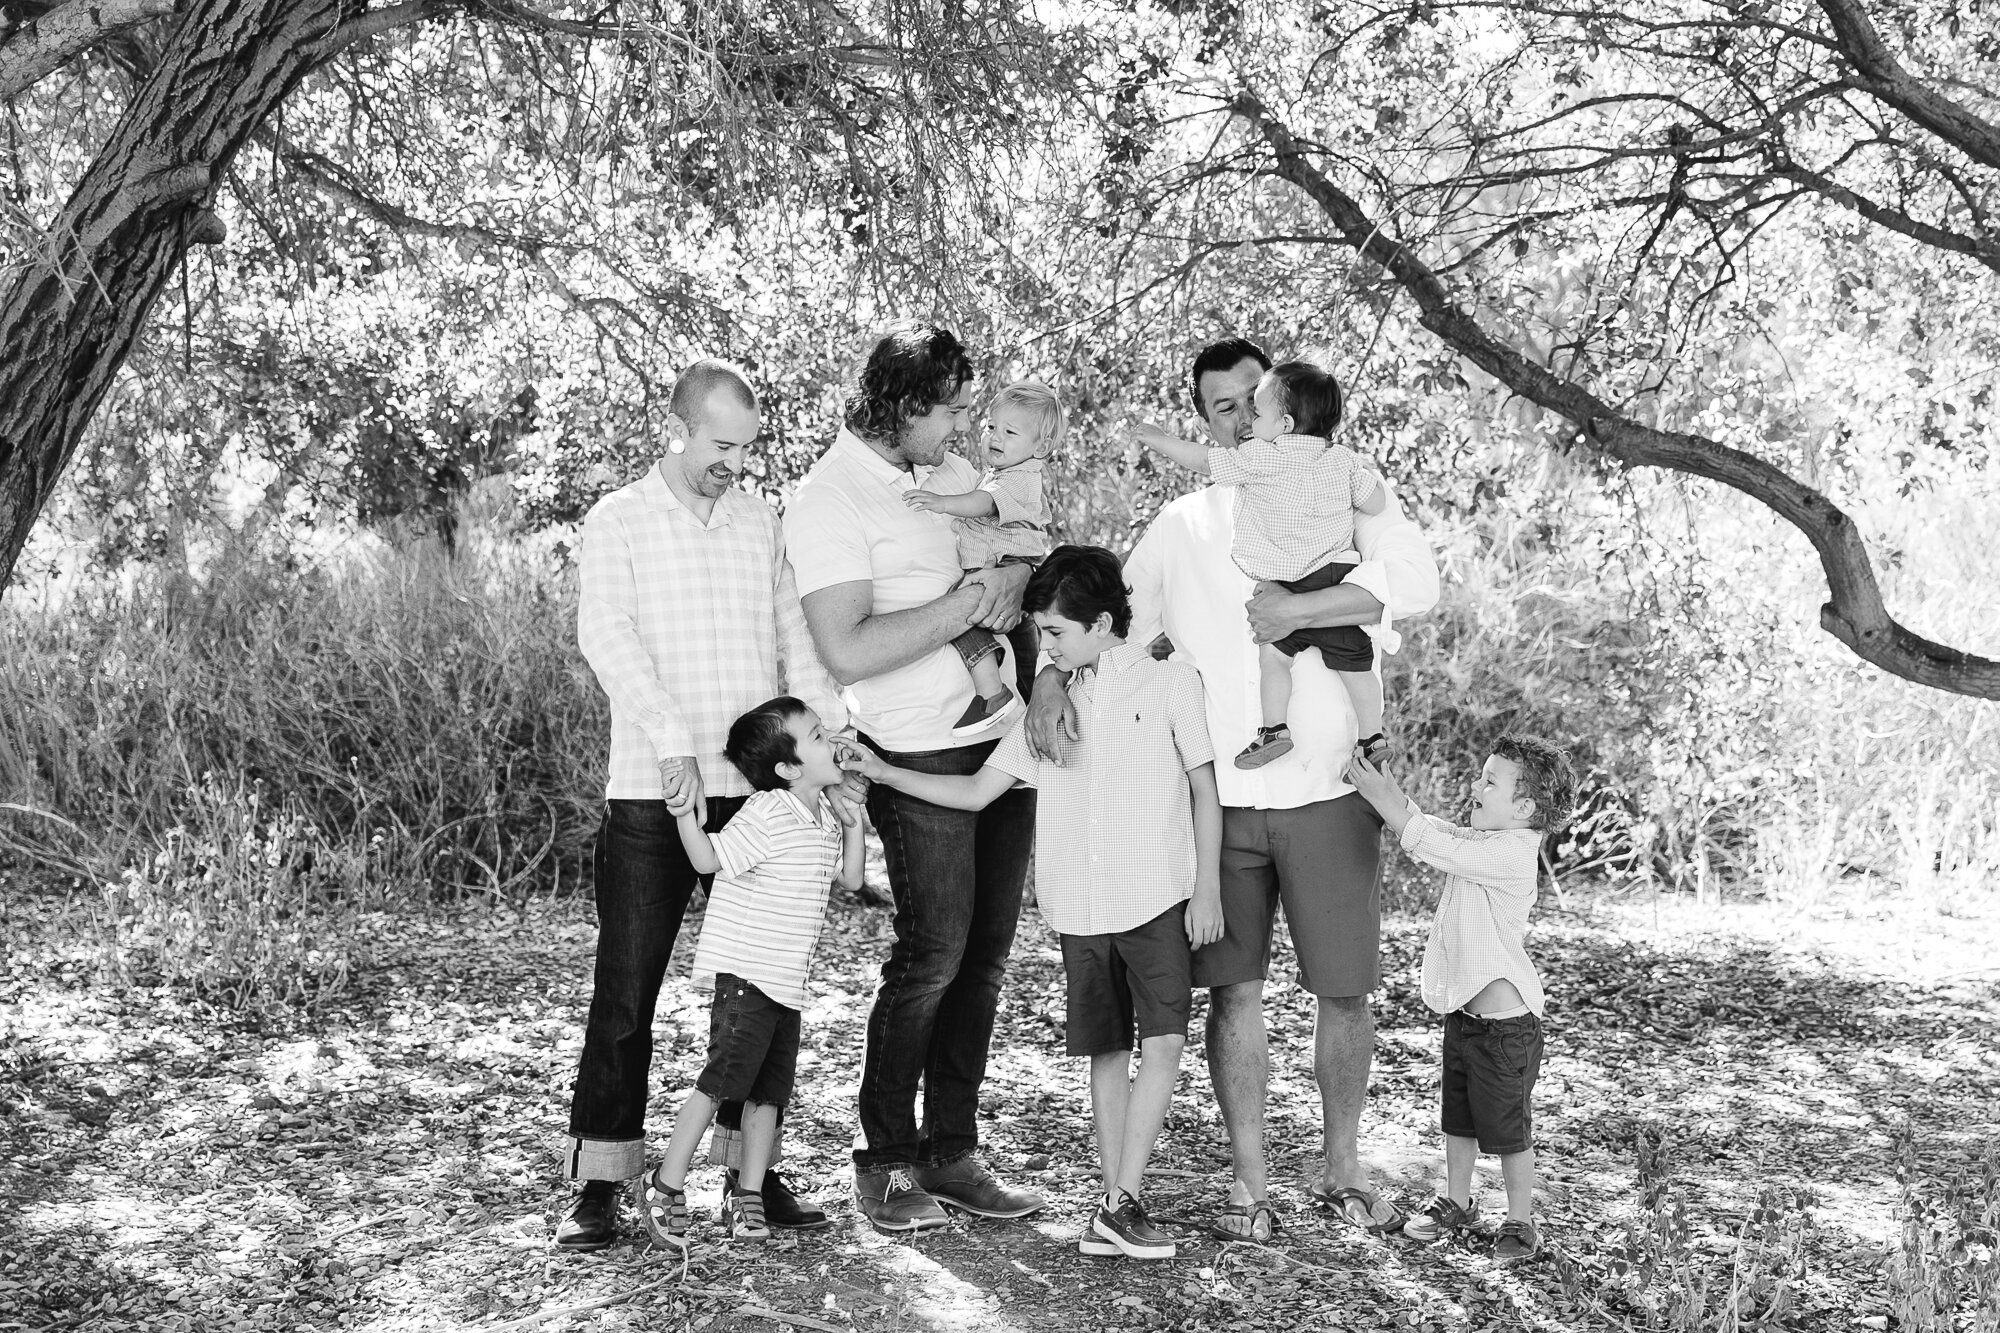 Los_Angeles_Family_Photography_Orange_County_Children_Babies_Field_Farm_Outdoors_Morning_Session_California_Girls_Boys_Kids_Photography-0791.jpg